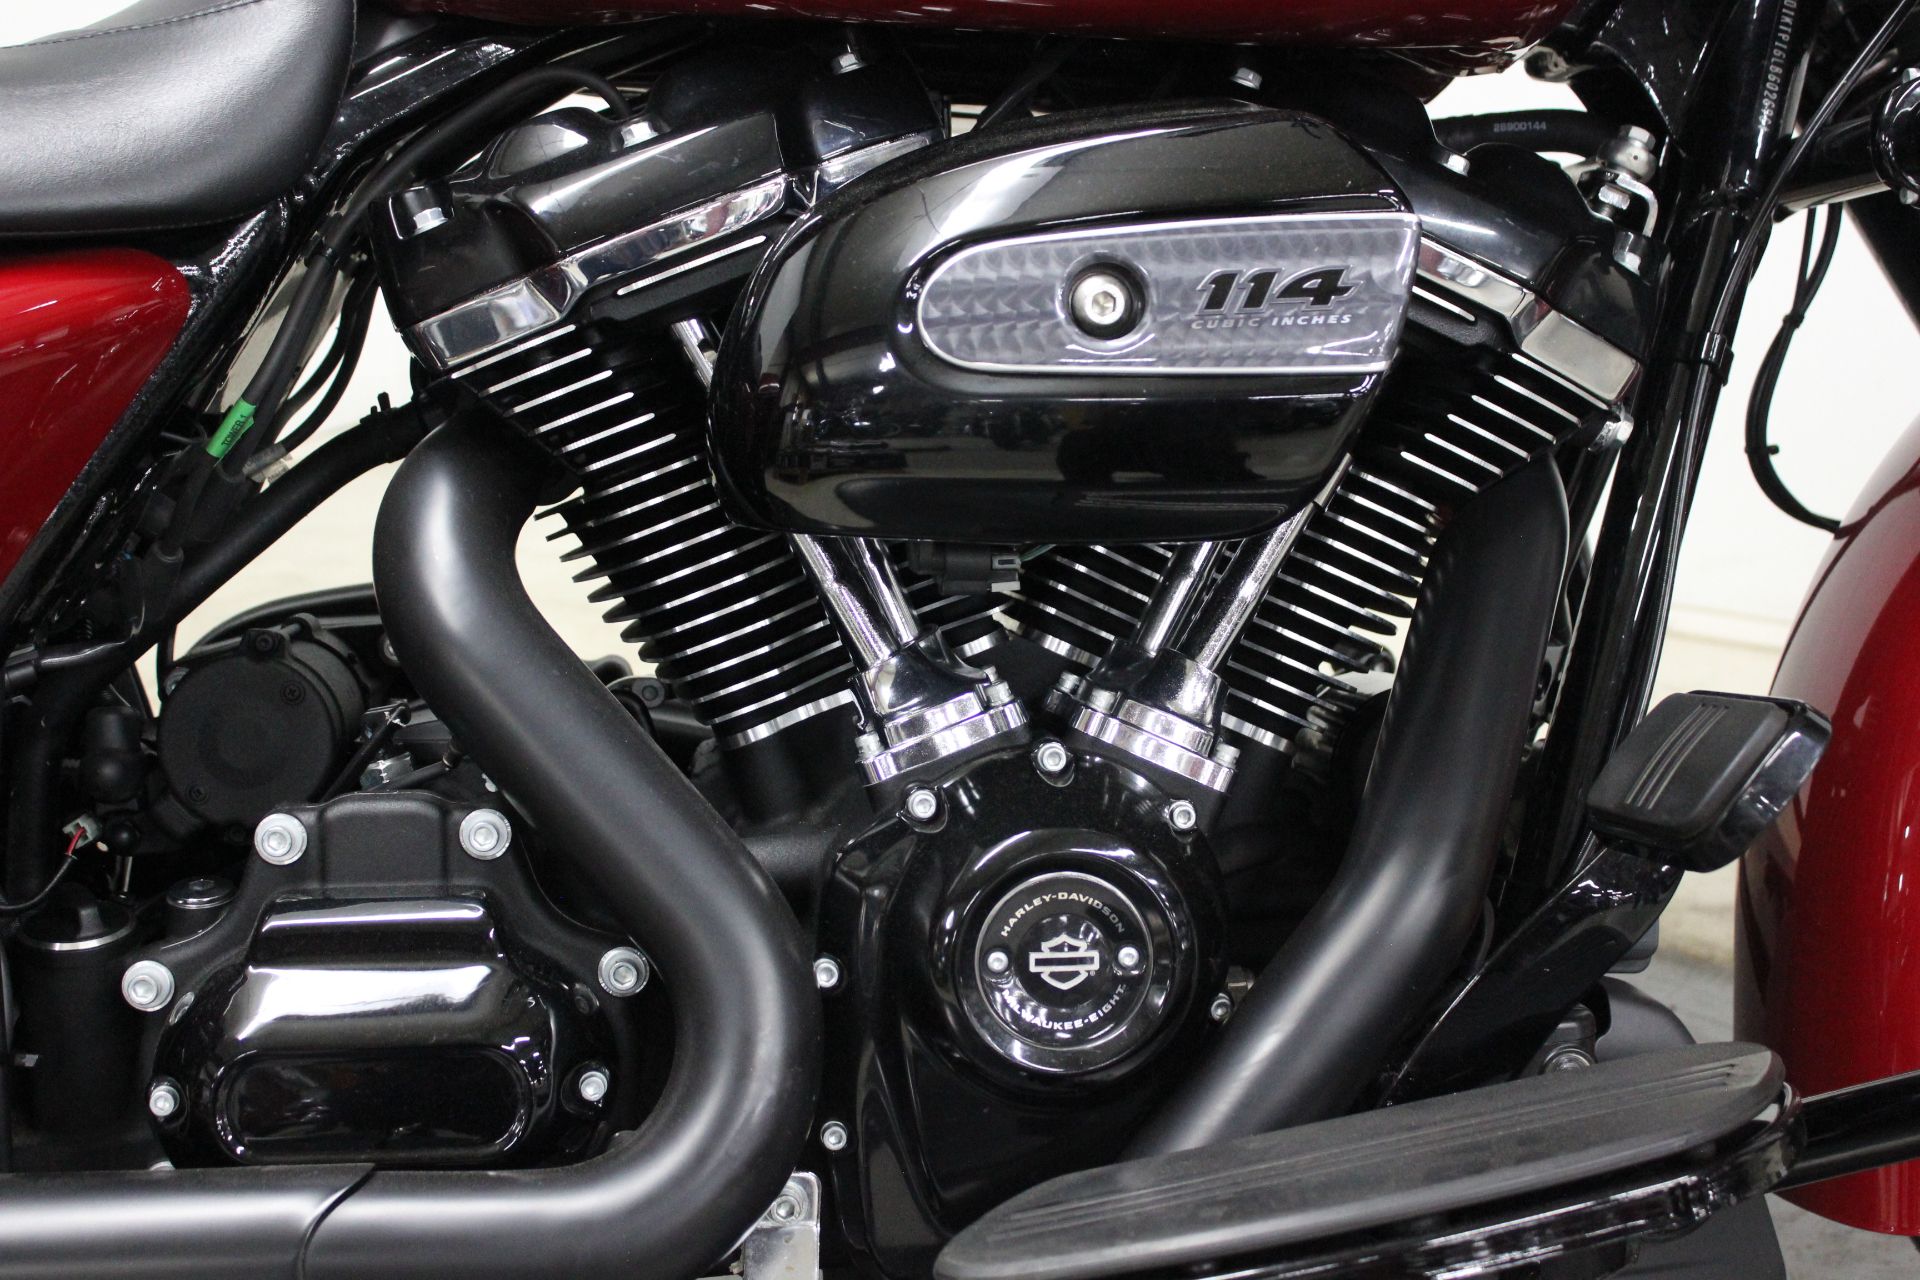 2020 Harley-Davidson ROAD GLIDE SPECIAL in Pittsfield, Massachusetts - Photo 14